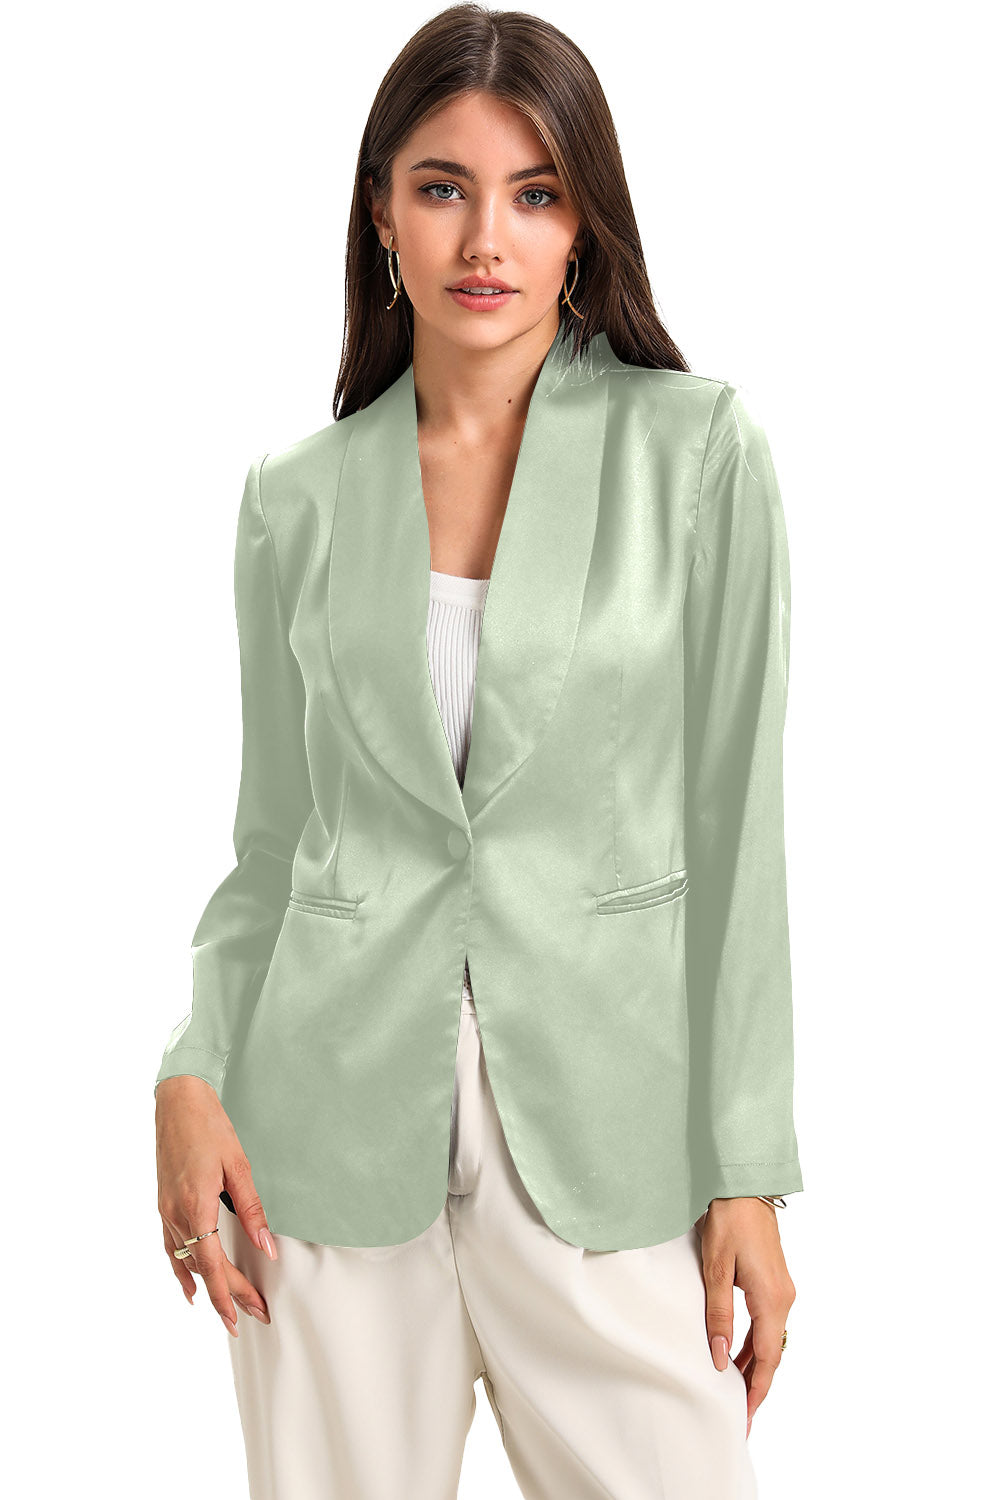 Green Collared Neck Single Breasted Blazer with Pockets